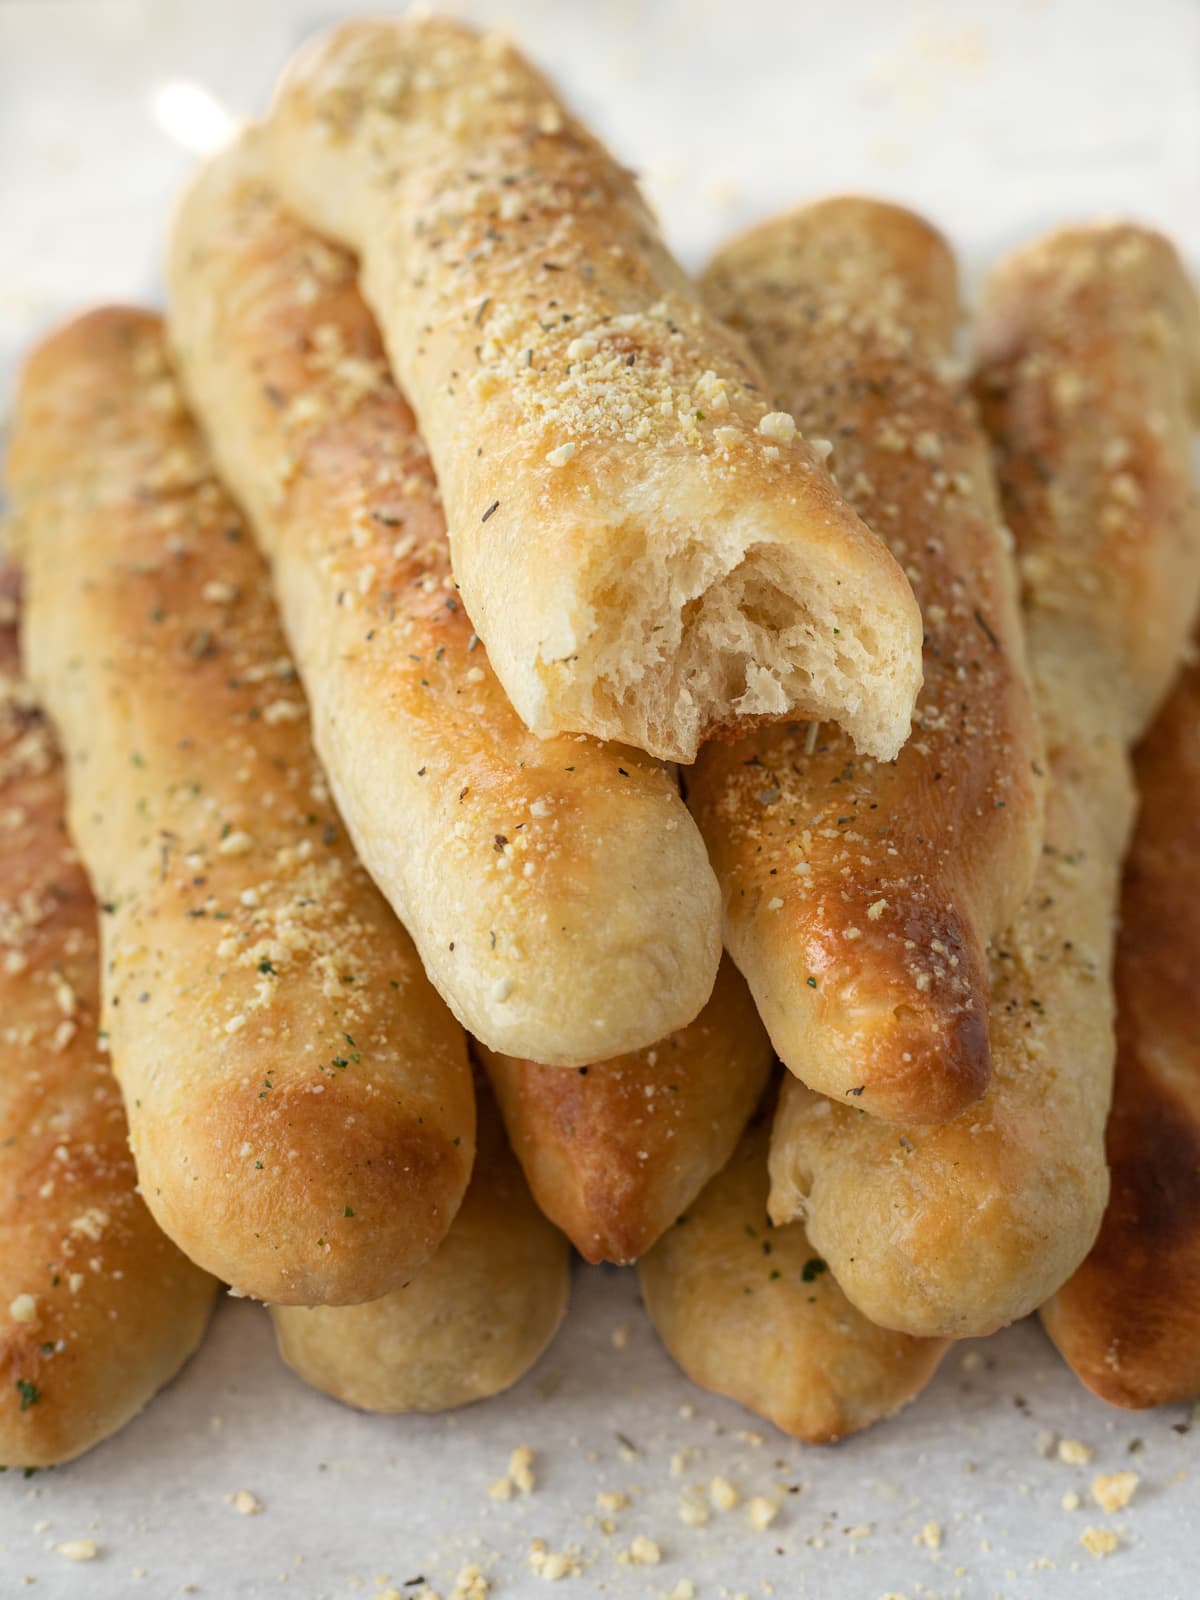 Many golden parmesan cheese breadsticks piled on a baking sheet.